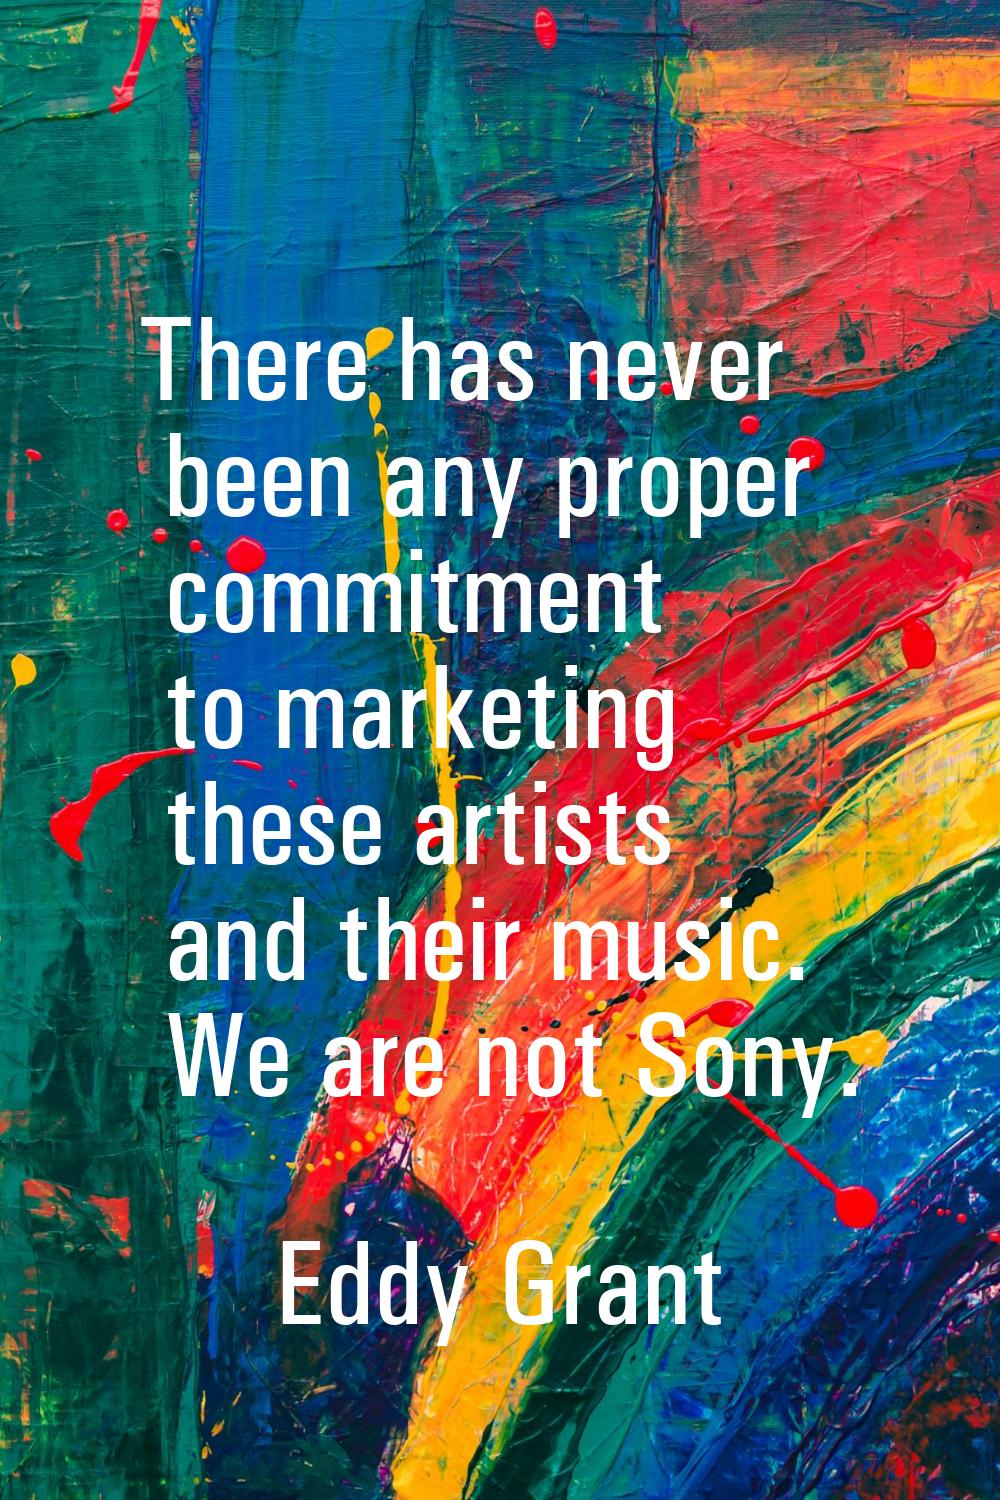 There has never been any proper commitment to marketing these artists and their music. We are not S